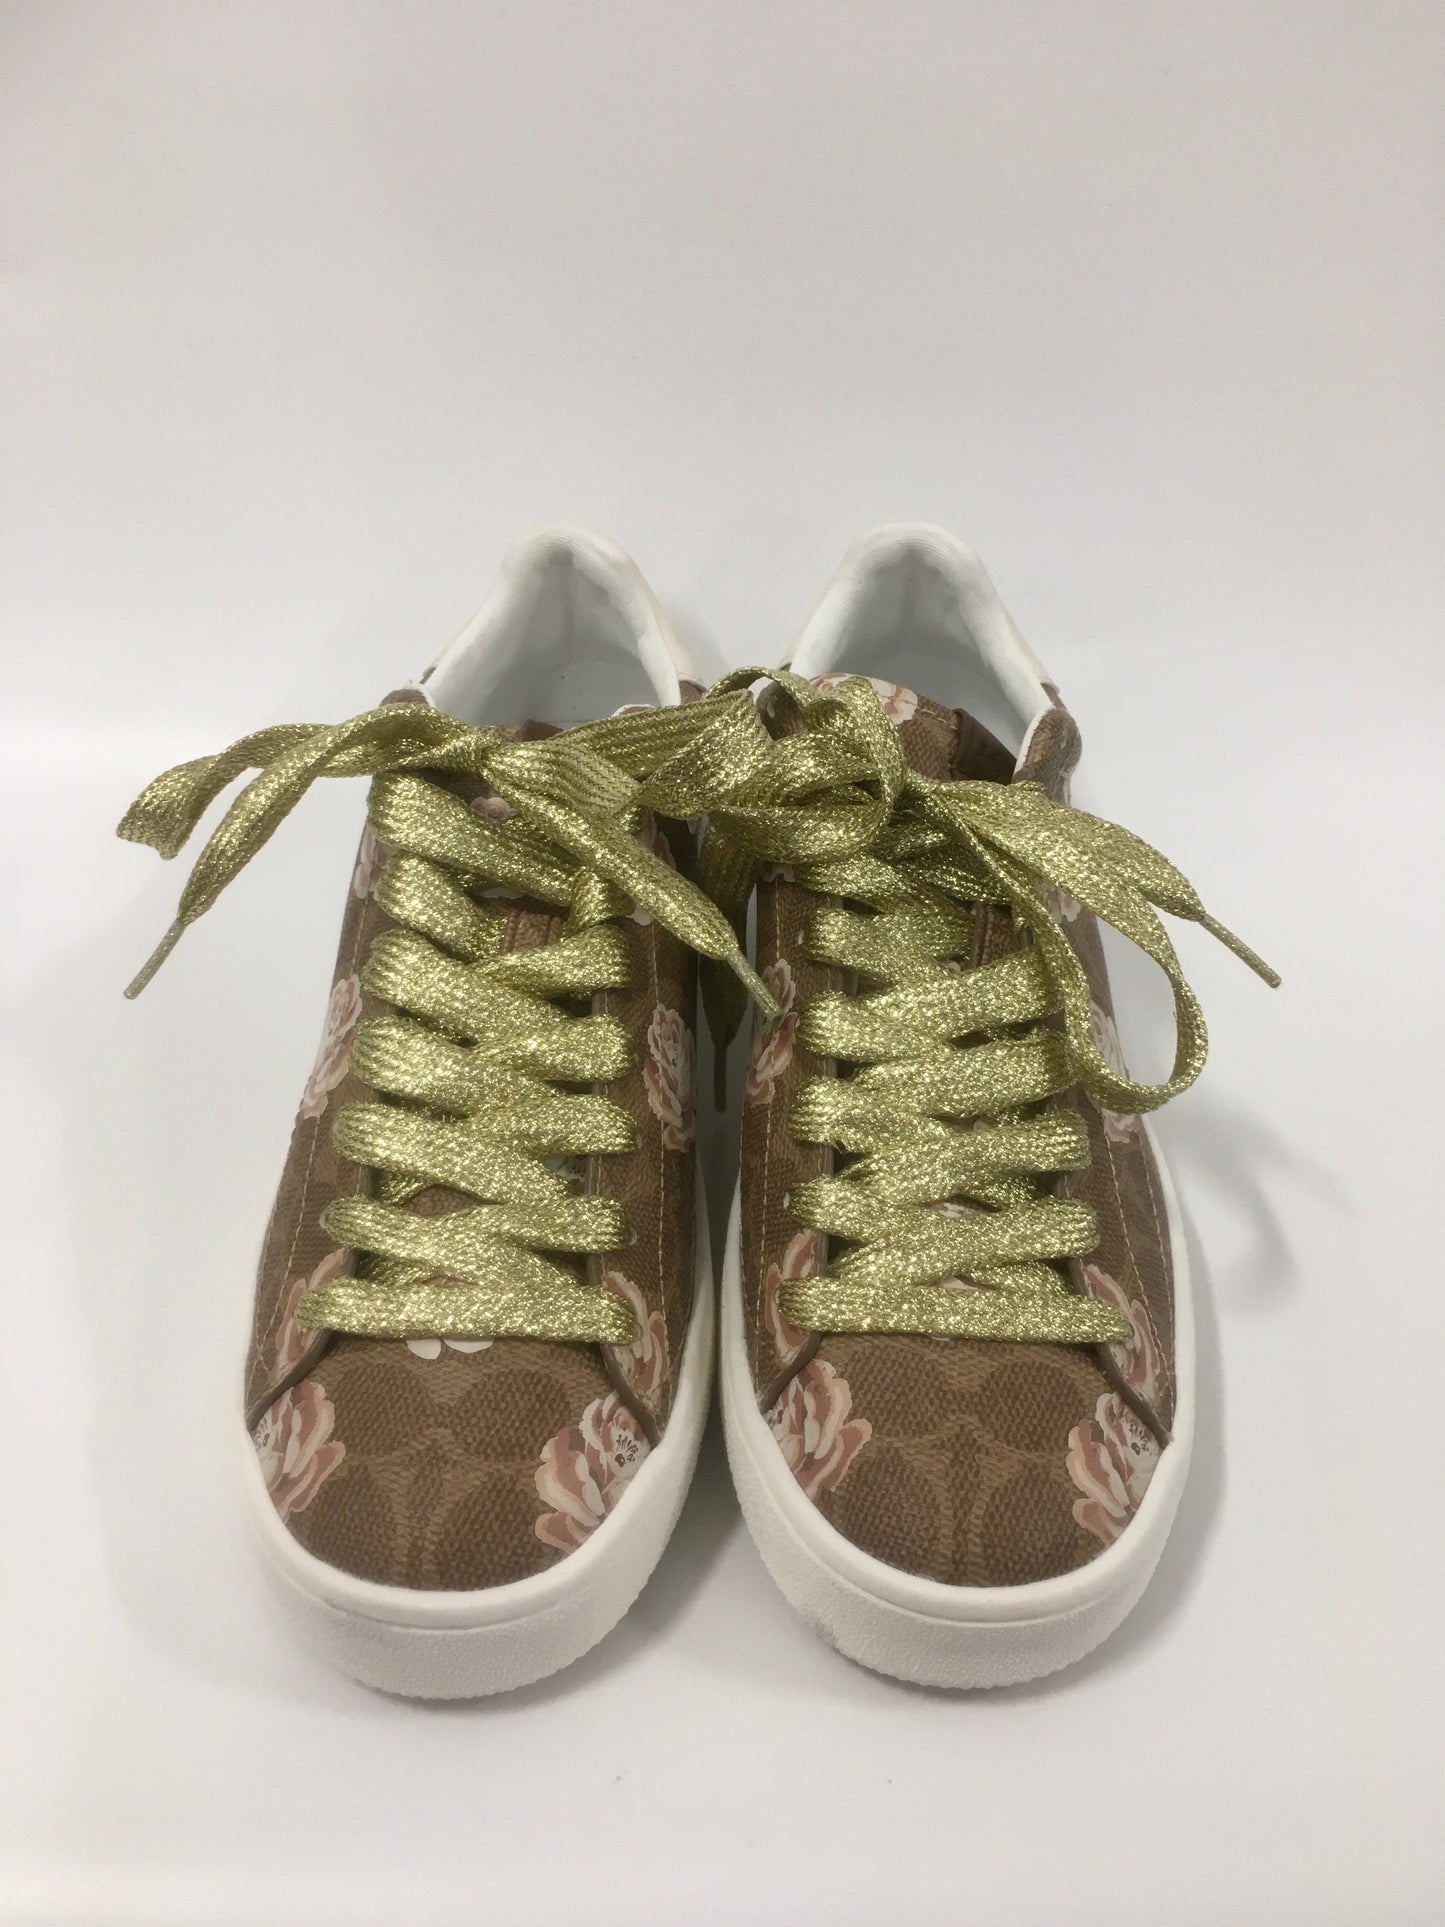 Floral Print Shoes Sneakers Coach, Size 10